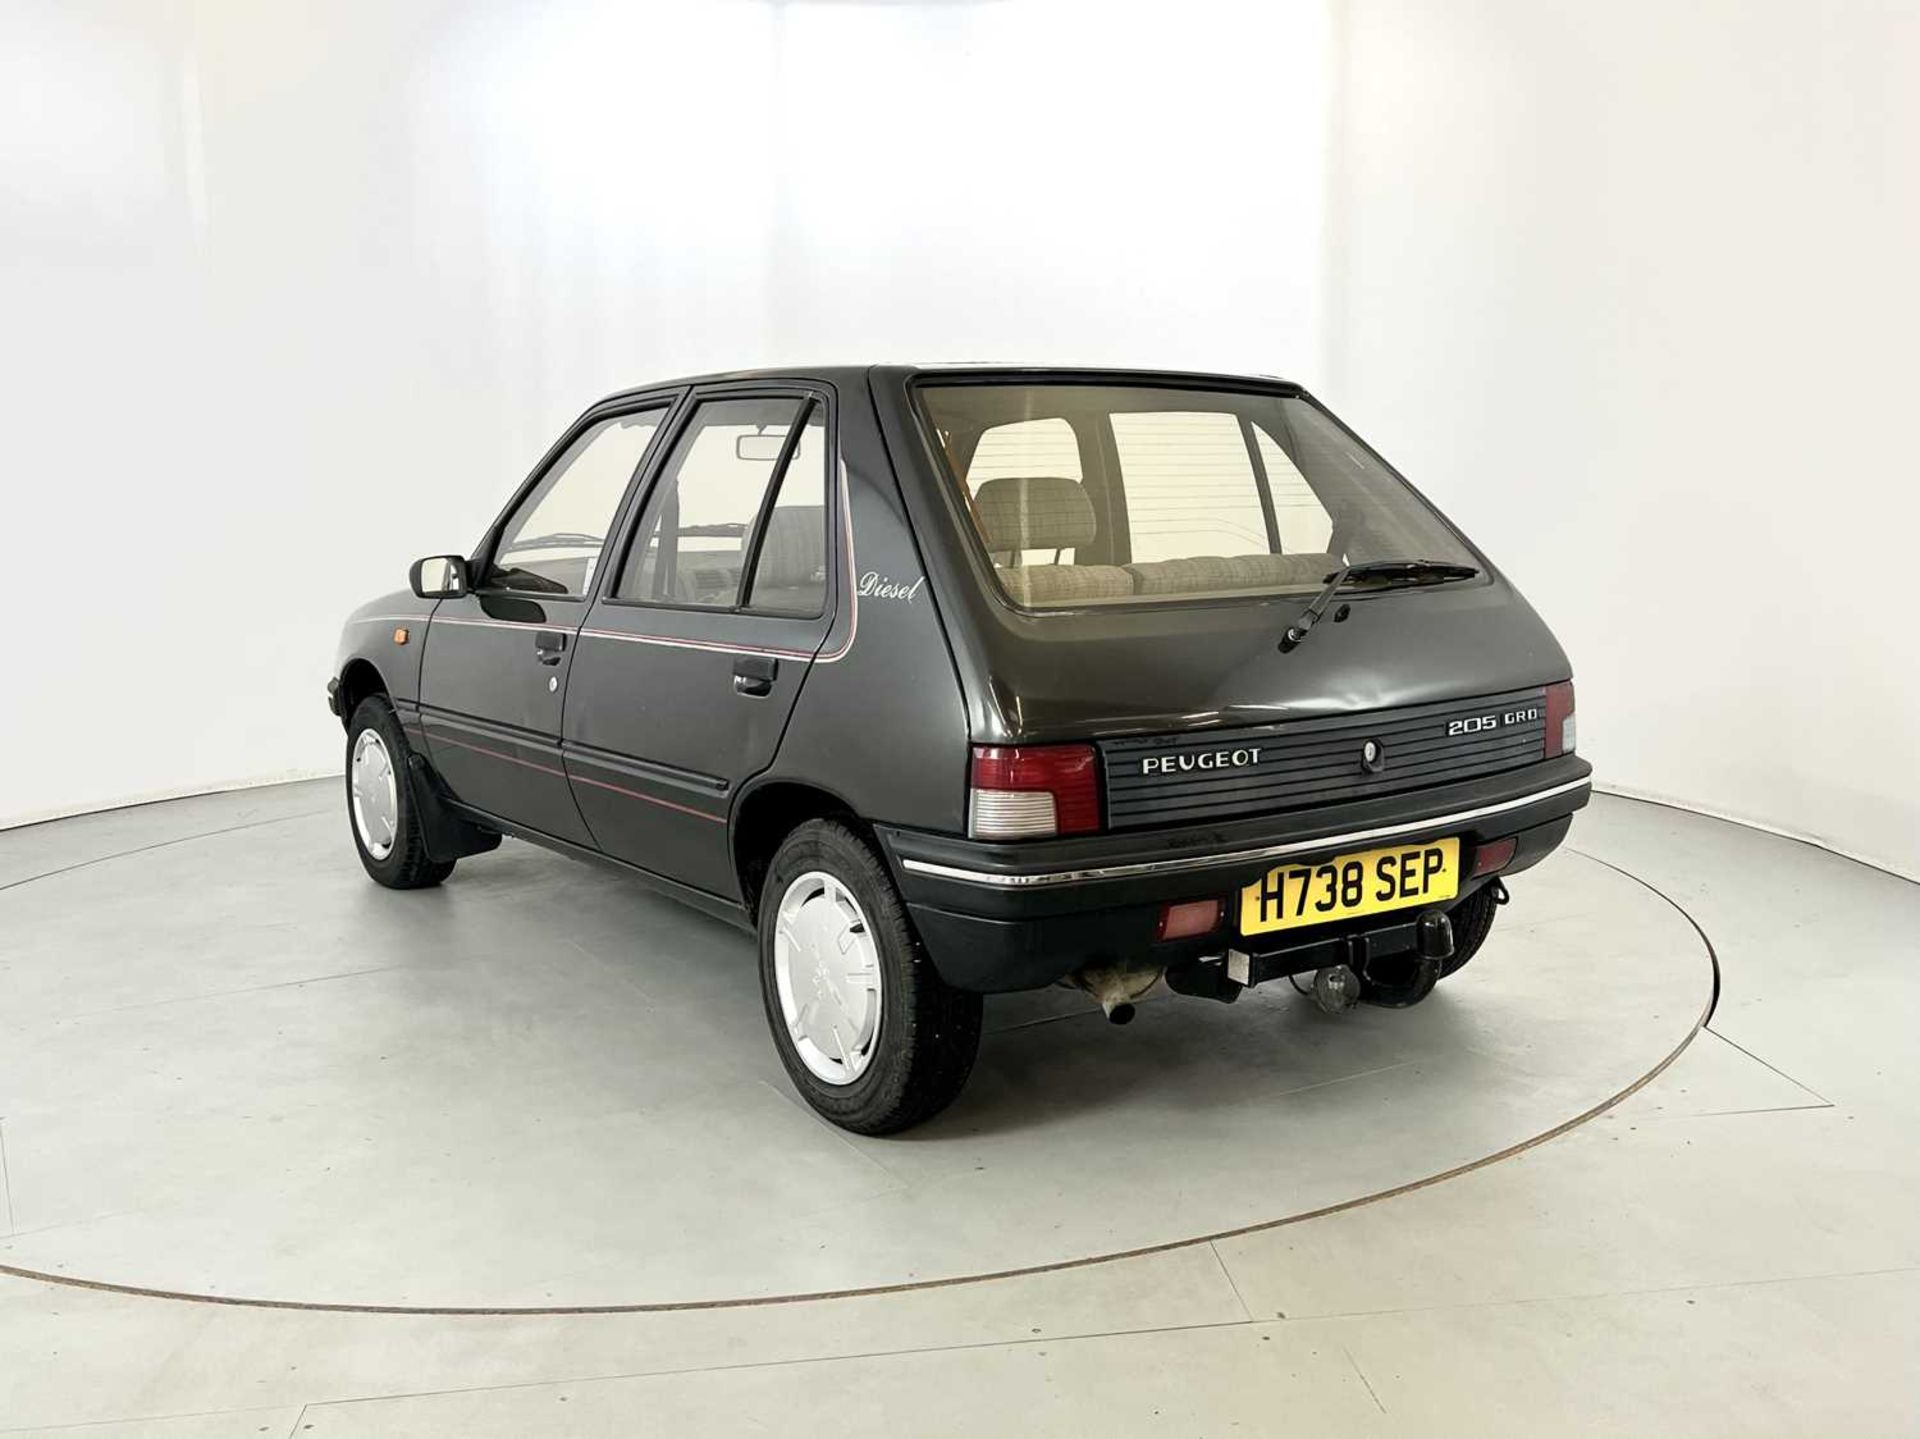 1990 Peugeot 205 GRD - Image 7 of 33